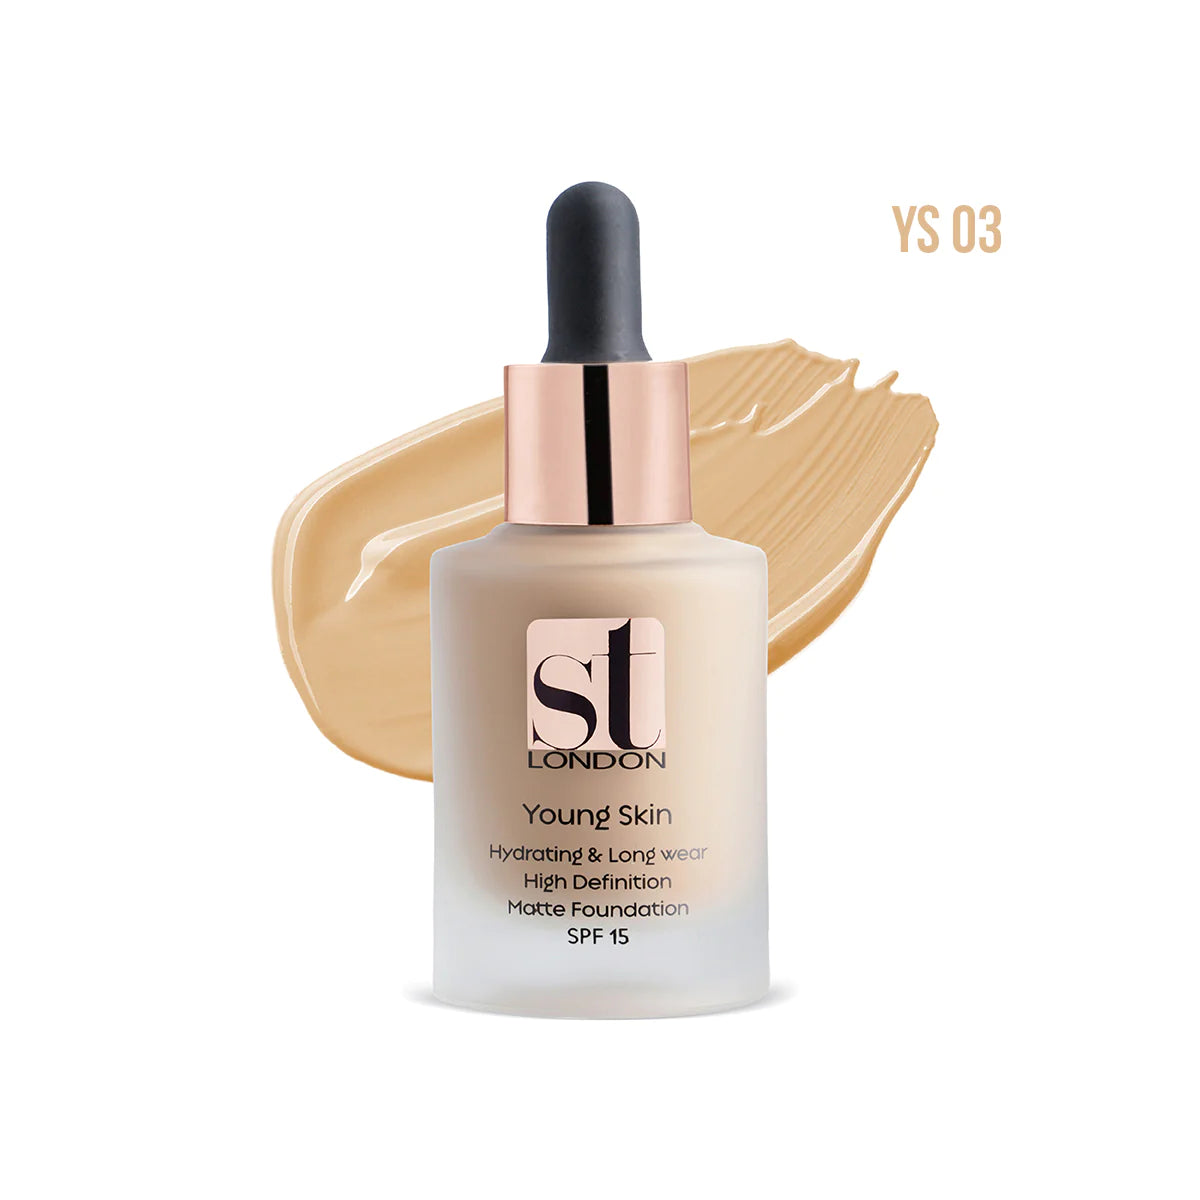 ST-LONDON YS03 YOUNG SKIN FOUNDATION